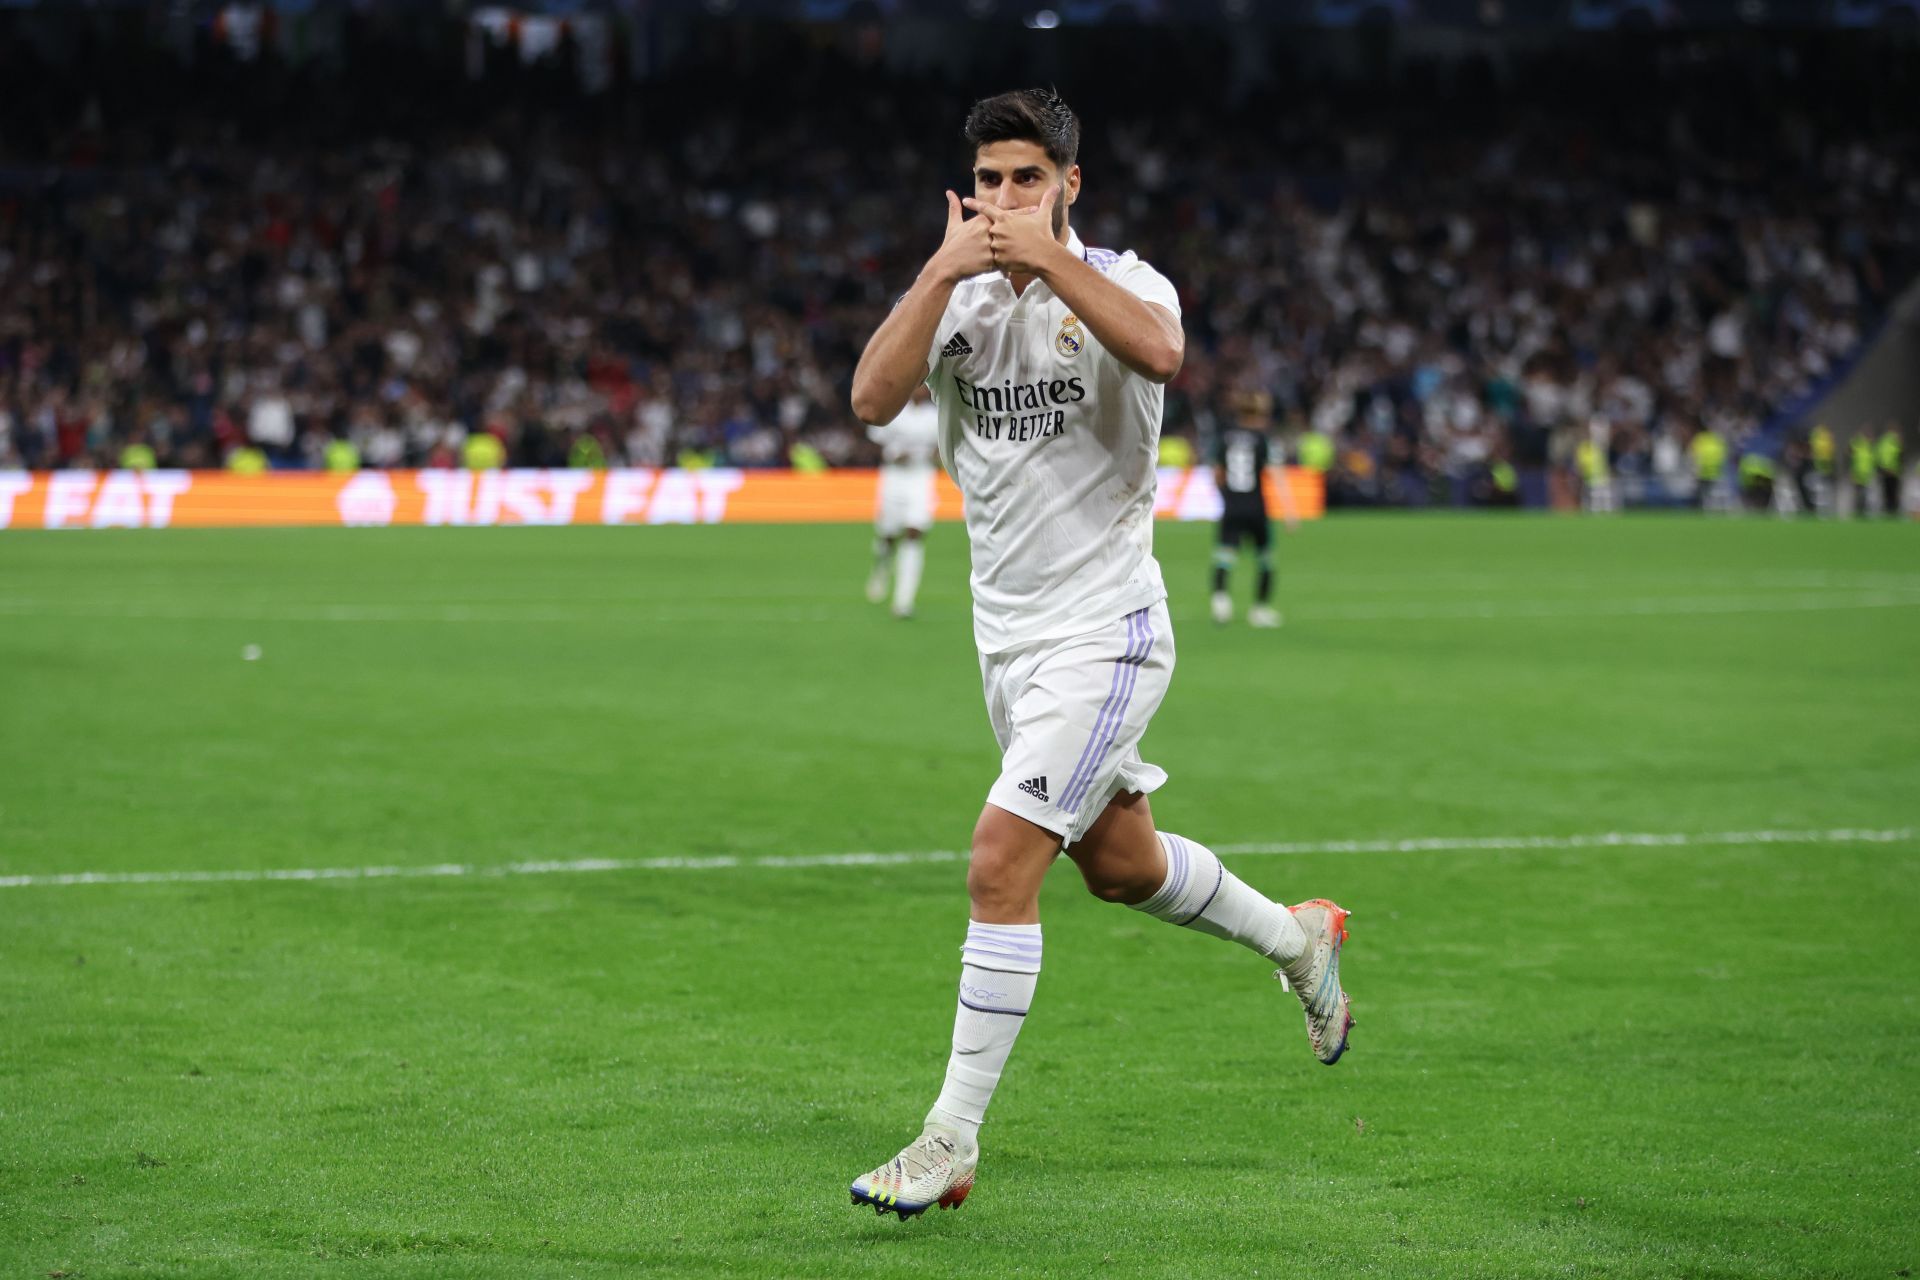 Asensio has been linked with Manchester United in the past